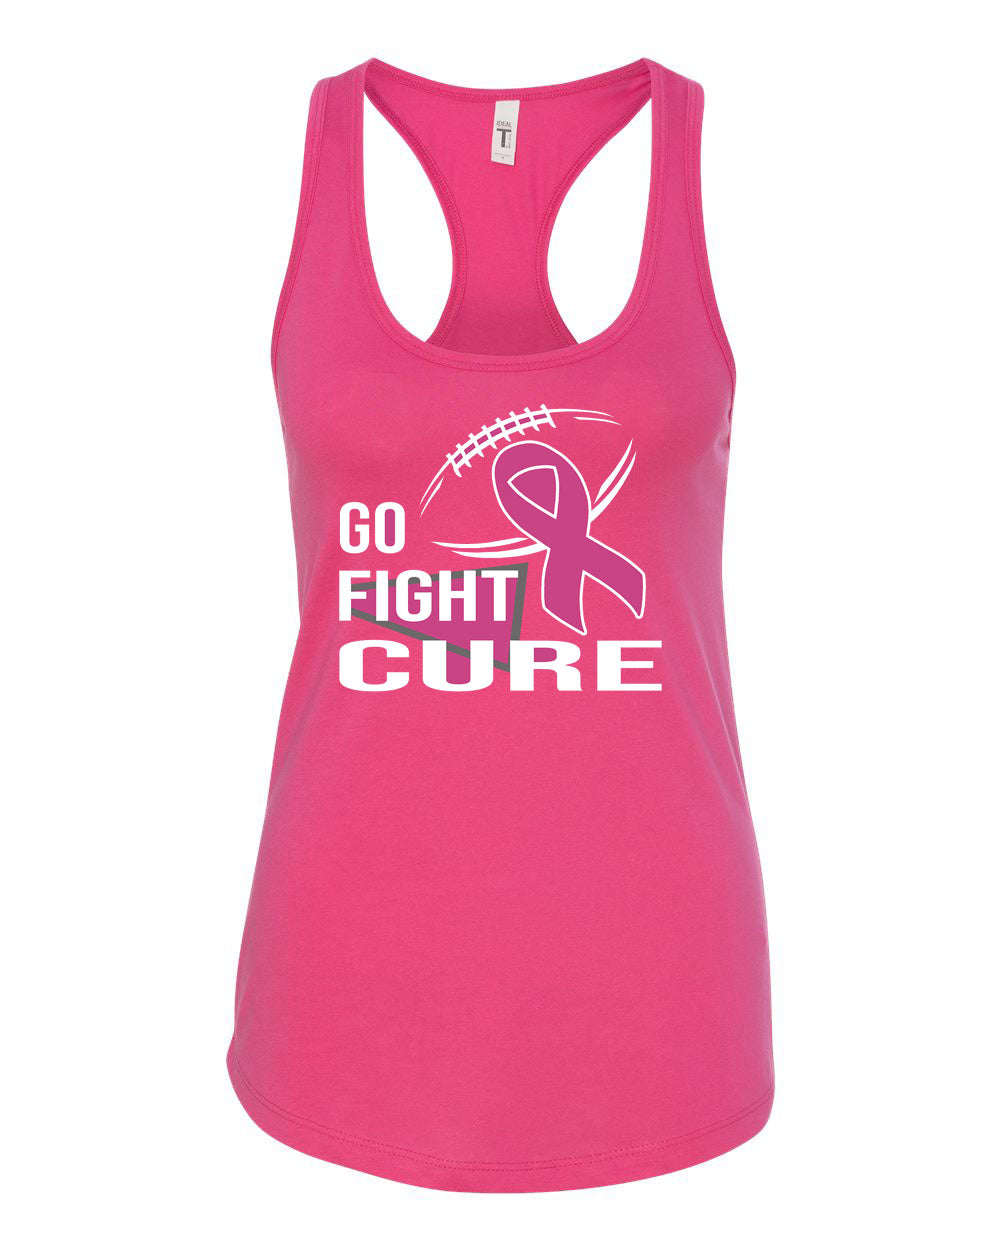 Go fight cure Tank Top